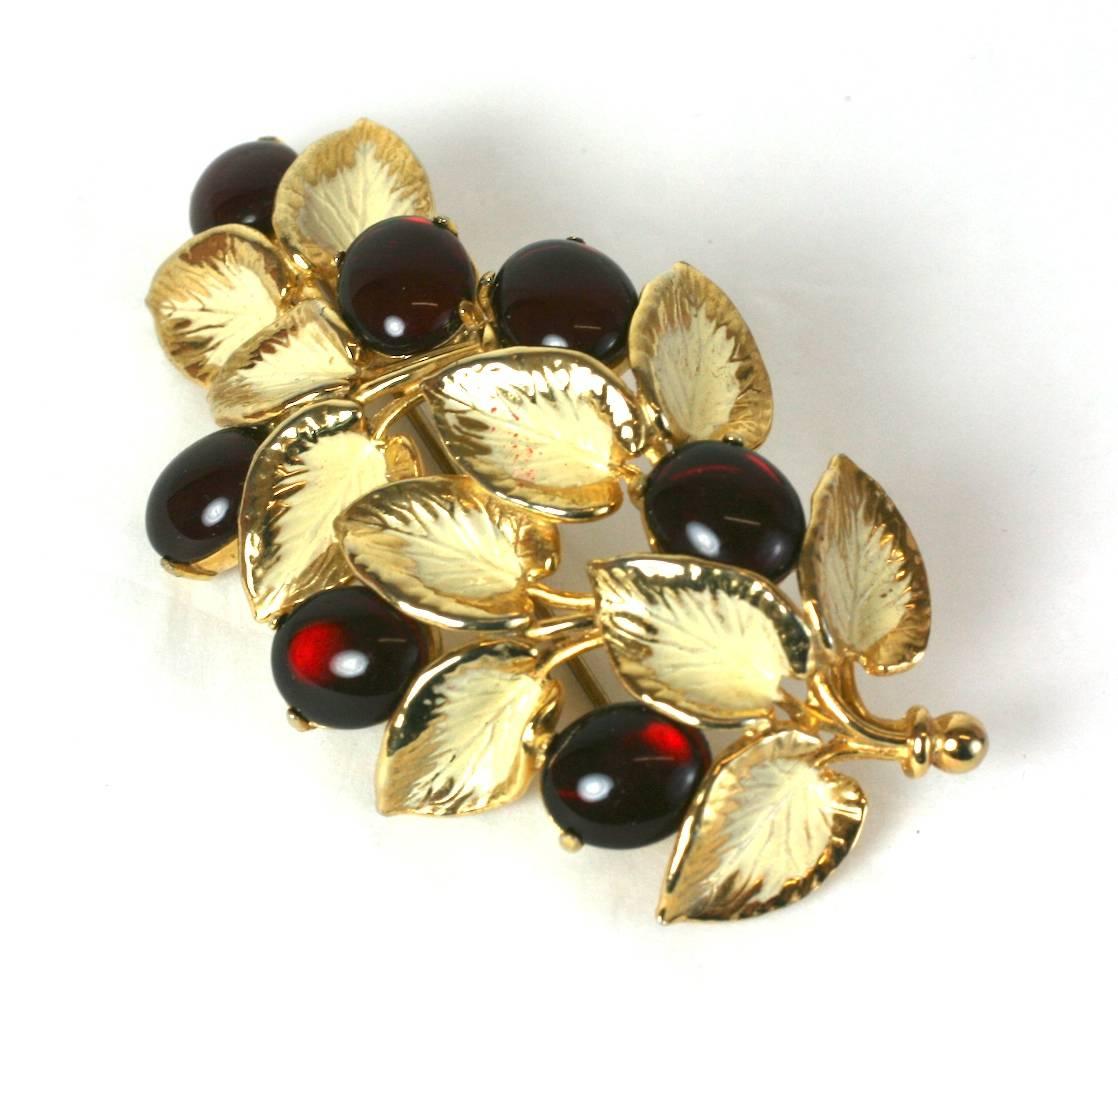 Schiaparelli's lovely garnet pate de verre cabochon naturalistic berry branch brooch. Of gilt metal and ivory colored cold enamel. Excellent Condition, Length 3.50